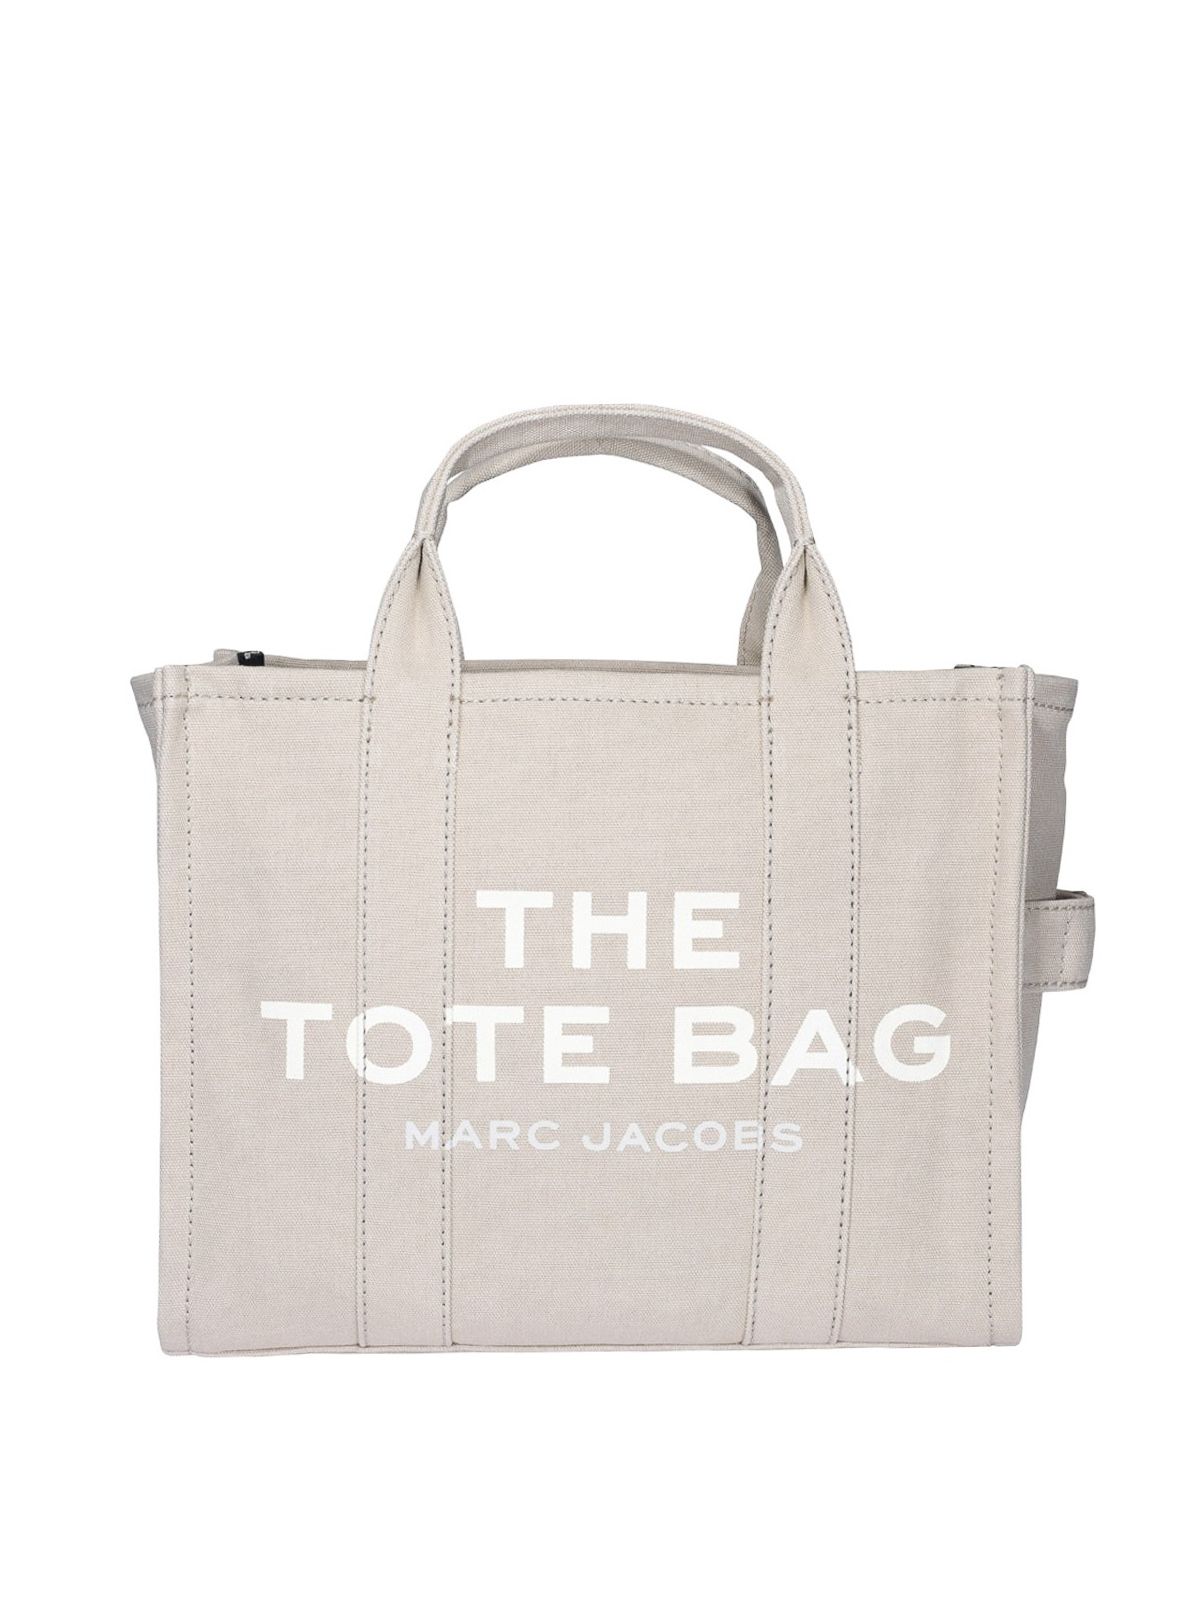 Totes bags Marc Jacobs - The Small Traveler tote - M0016161260 | iKRIX.com